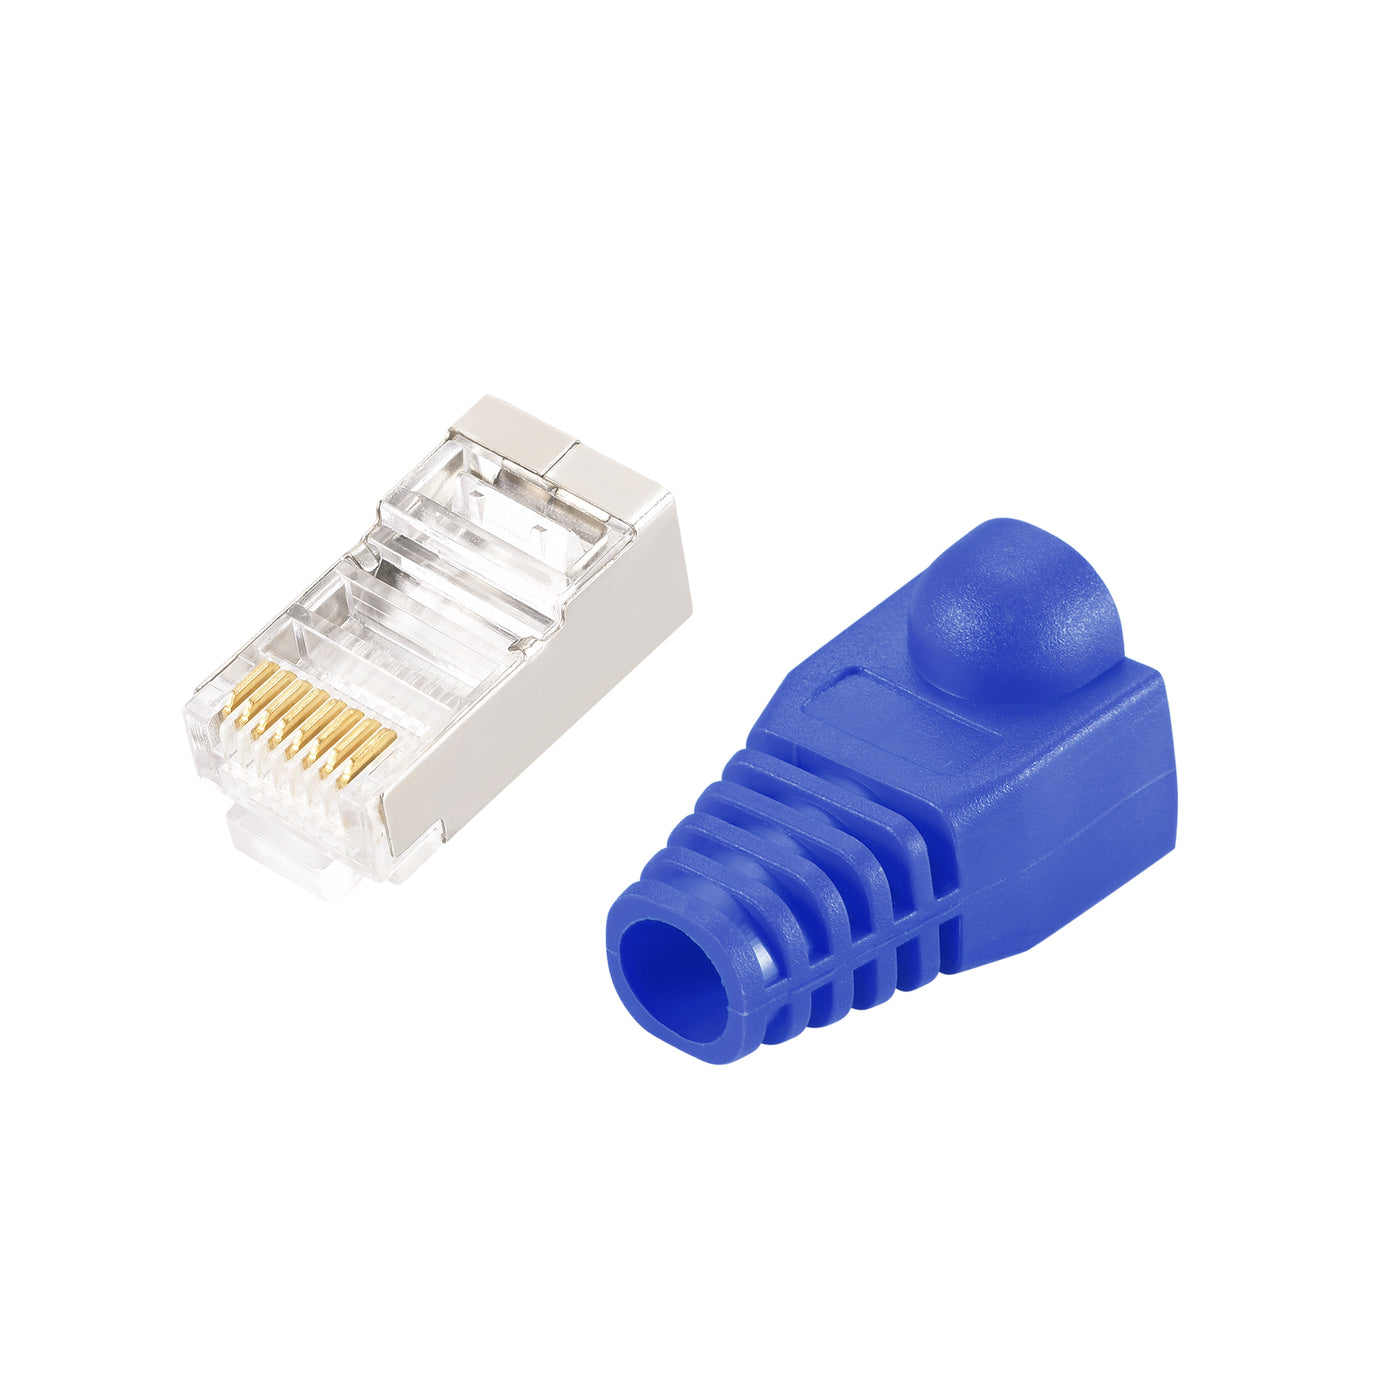 uxcell Uxcell 50Sets Cat5e RJ45 Shielded Modular Plugs Connector w Blue Strain Relief Boots